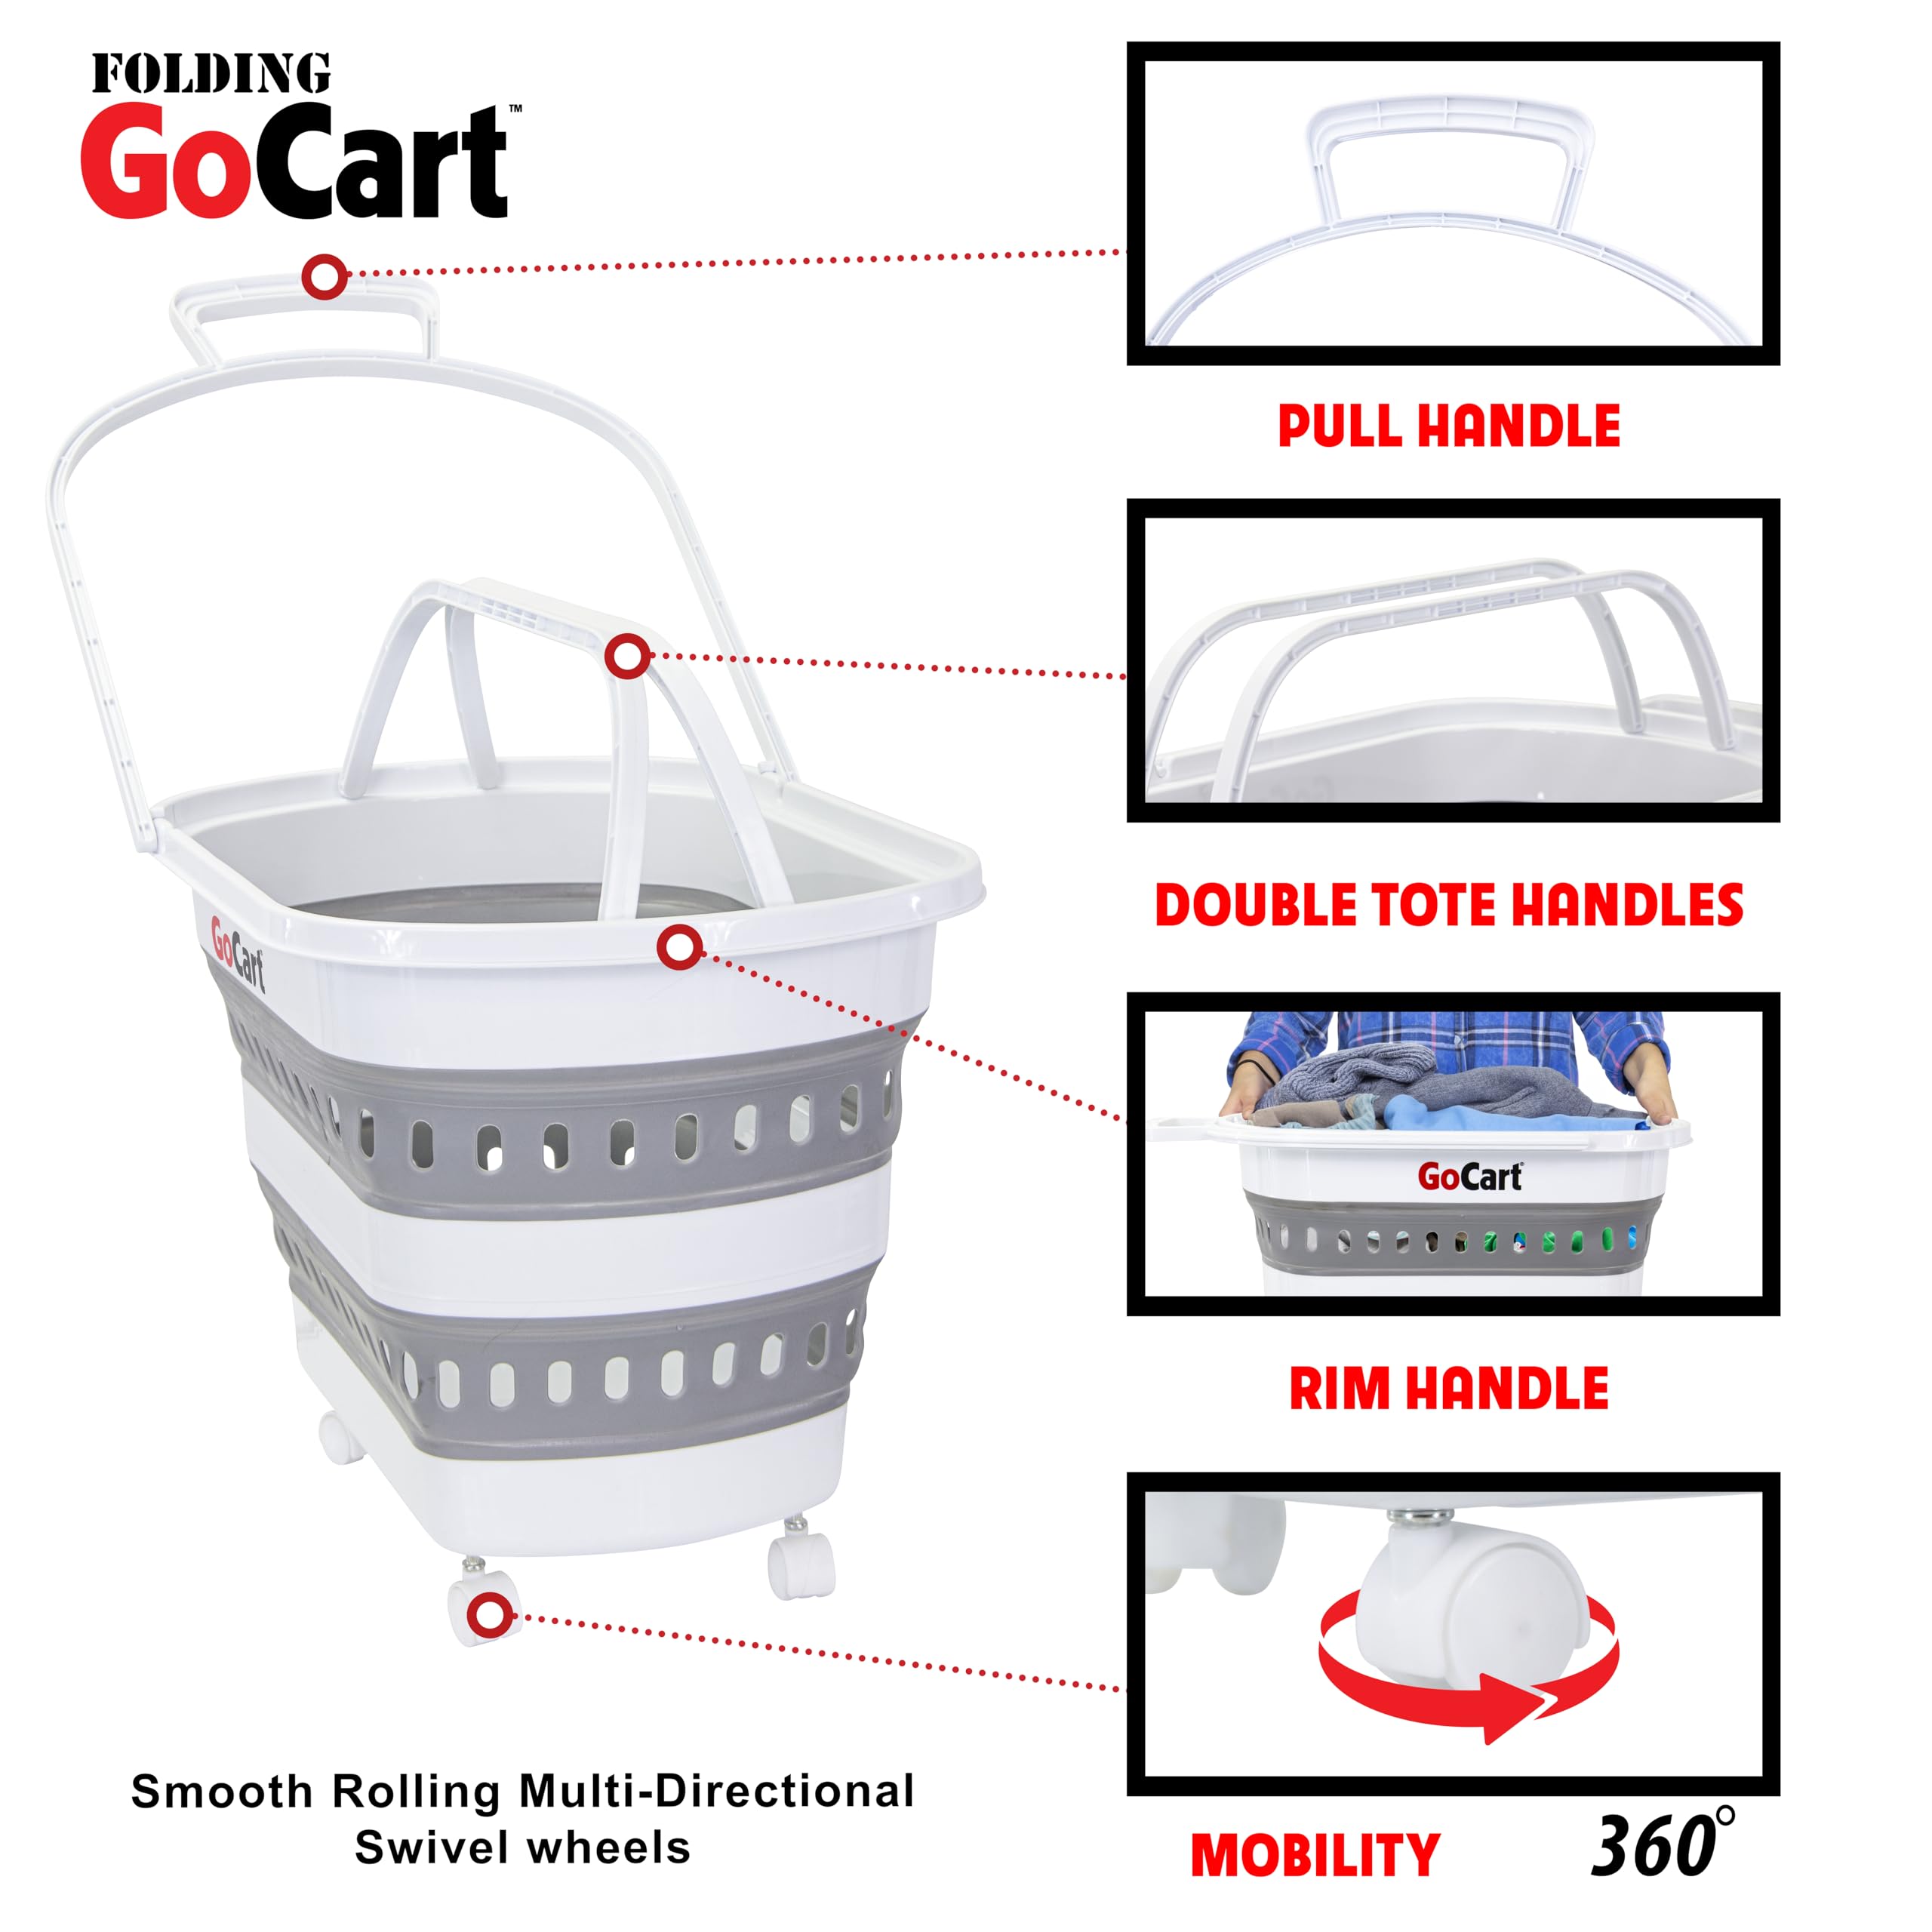 dbest products Folding Gocart Collapsible Laundry Basket on Wheels Grocery Cart Shopping Foldable Pop Up Plastic Hamper Tote Handles Cesto para ropa sucia, White